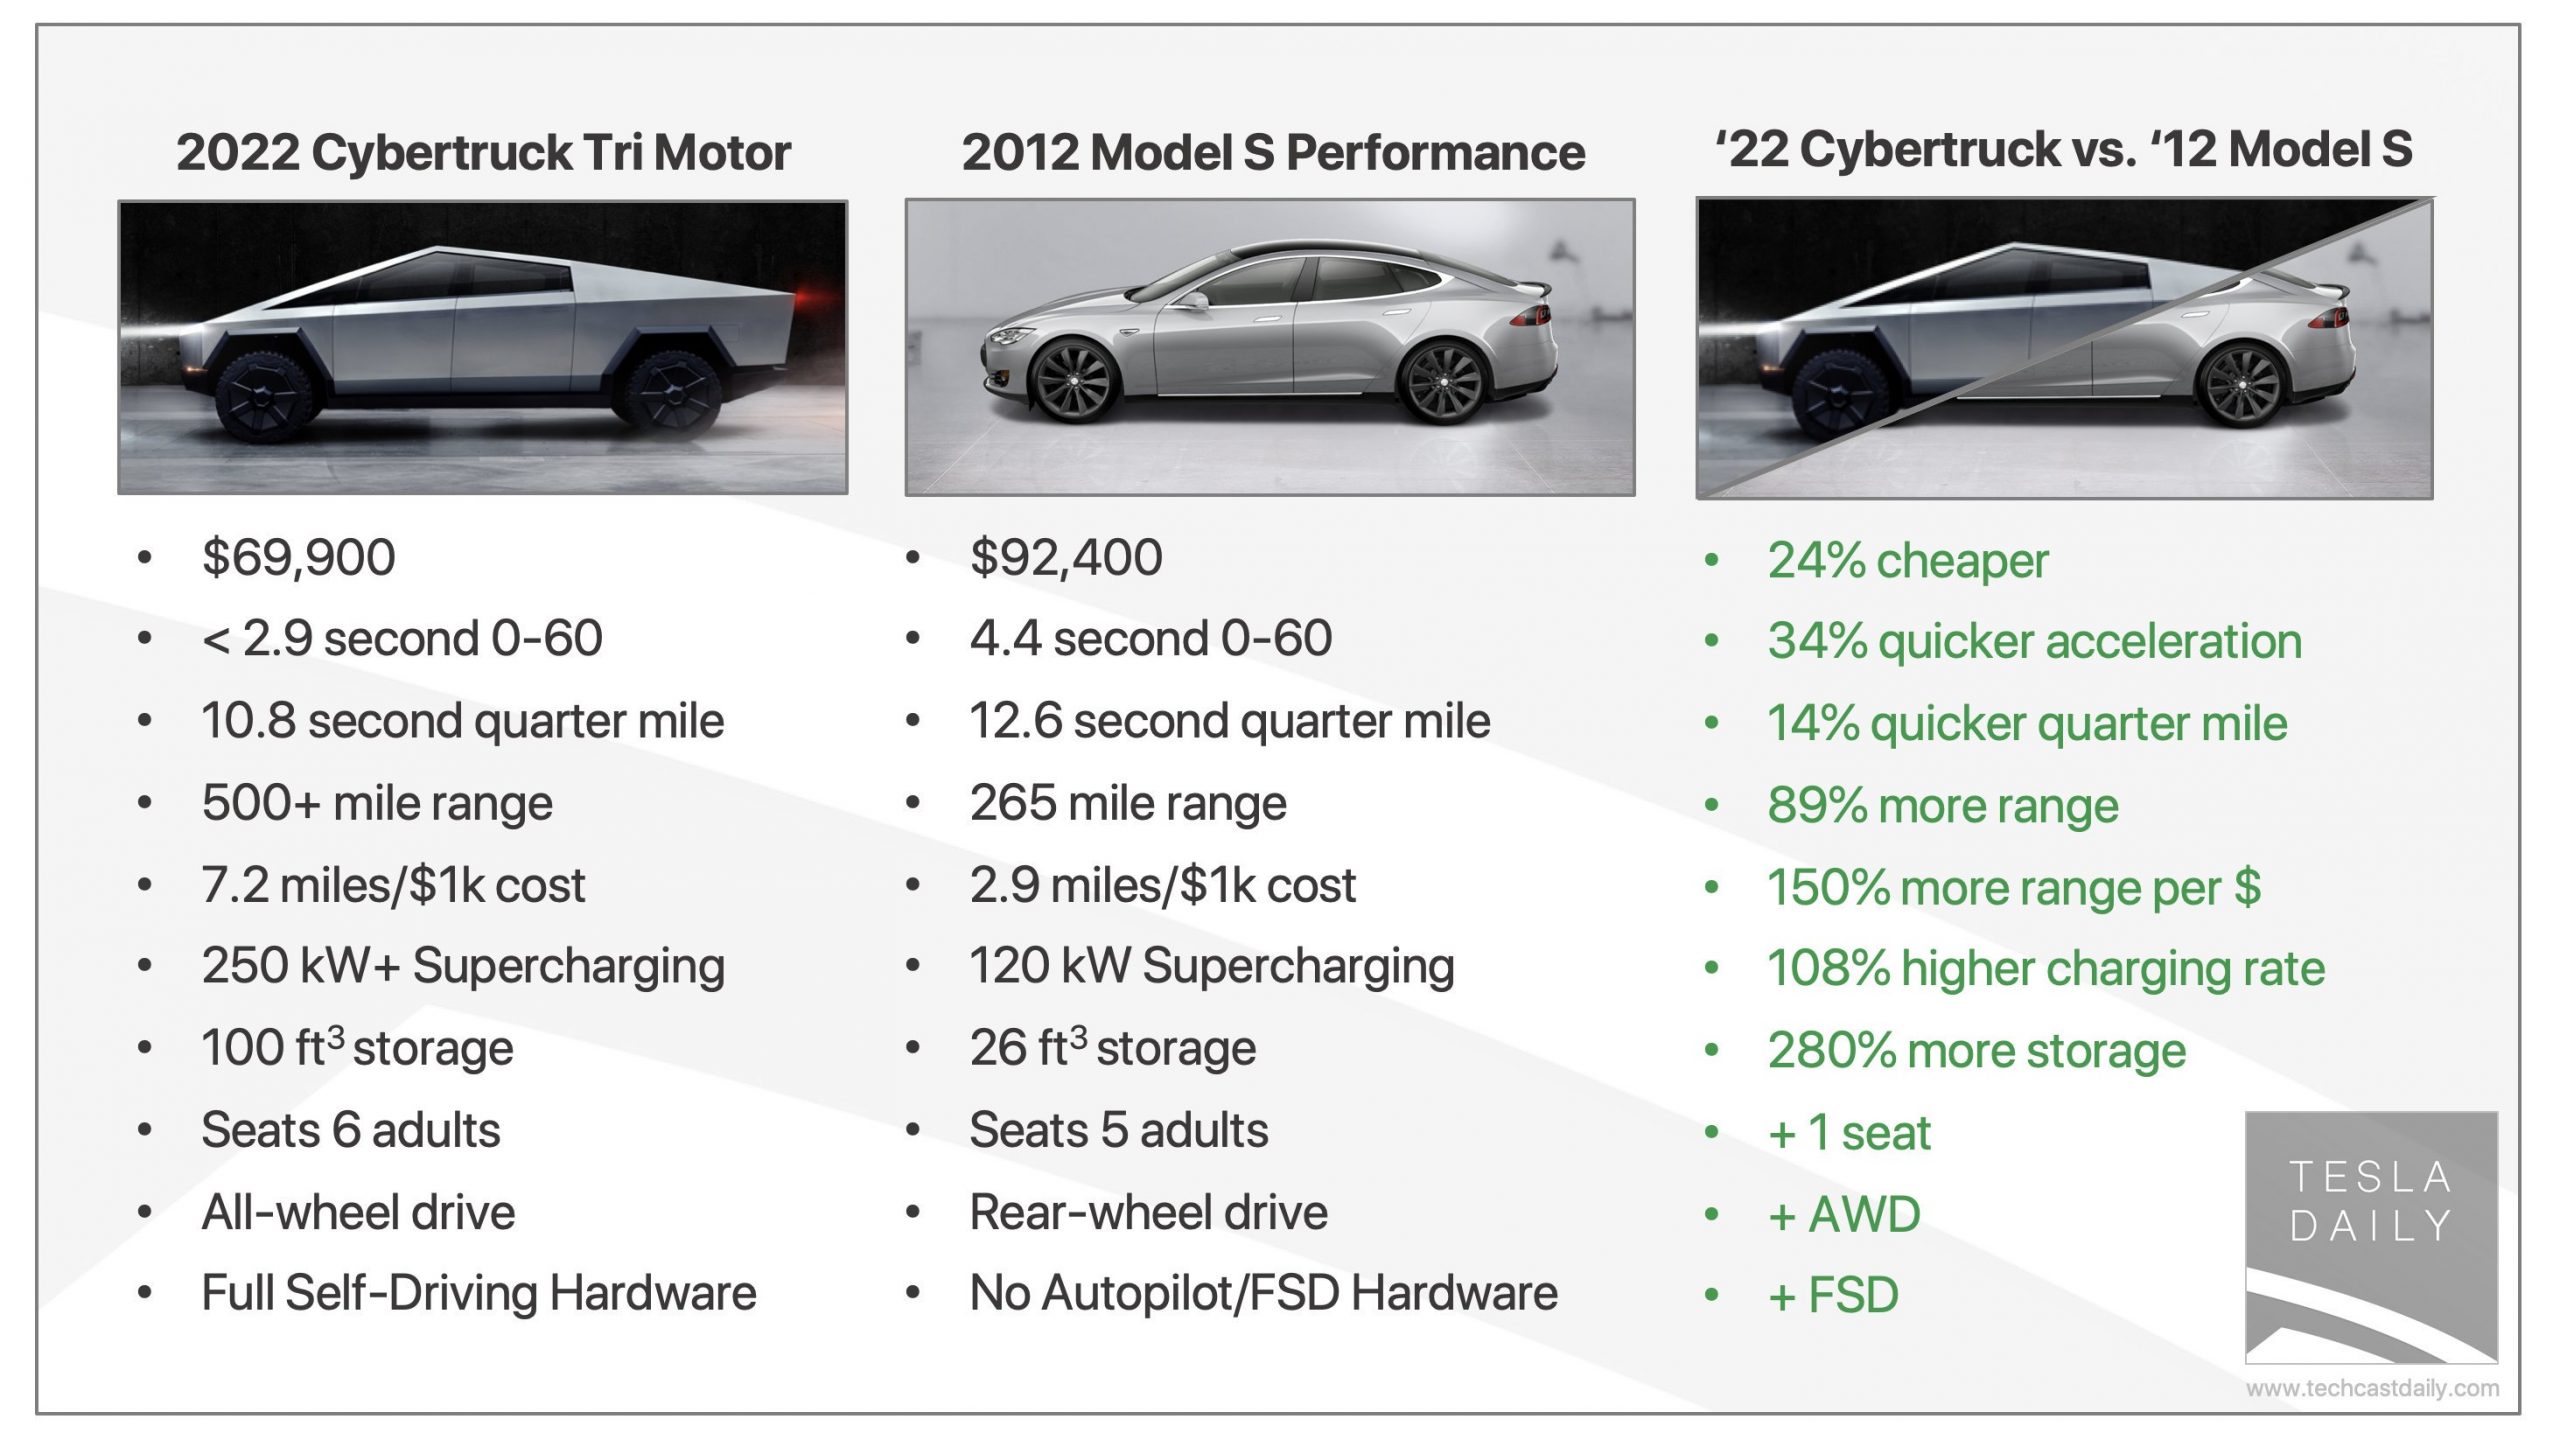 Tesla Daily comparing Model S to Cybertruck